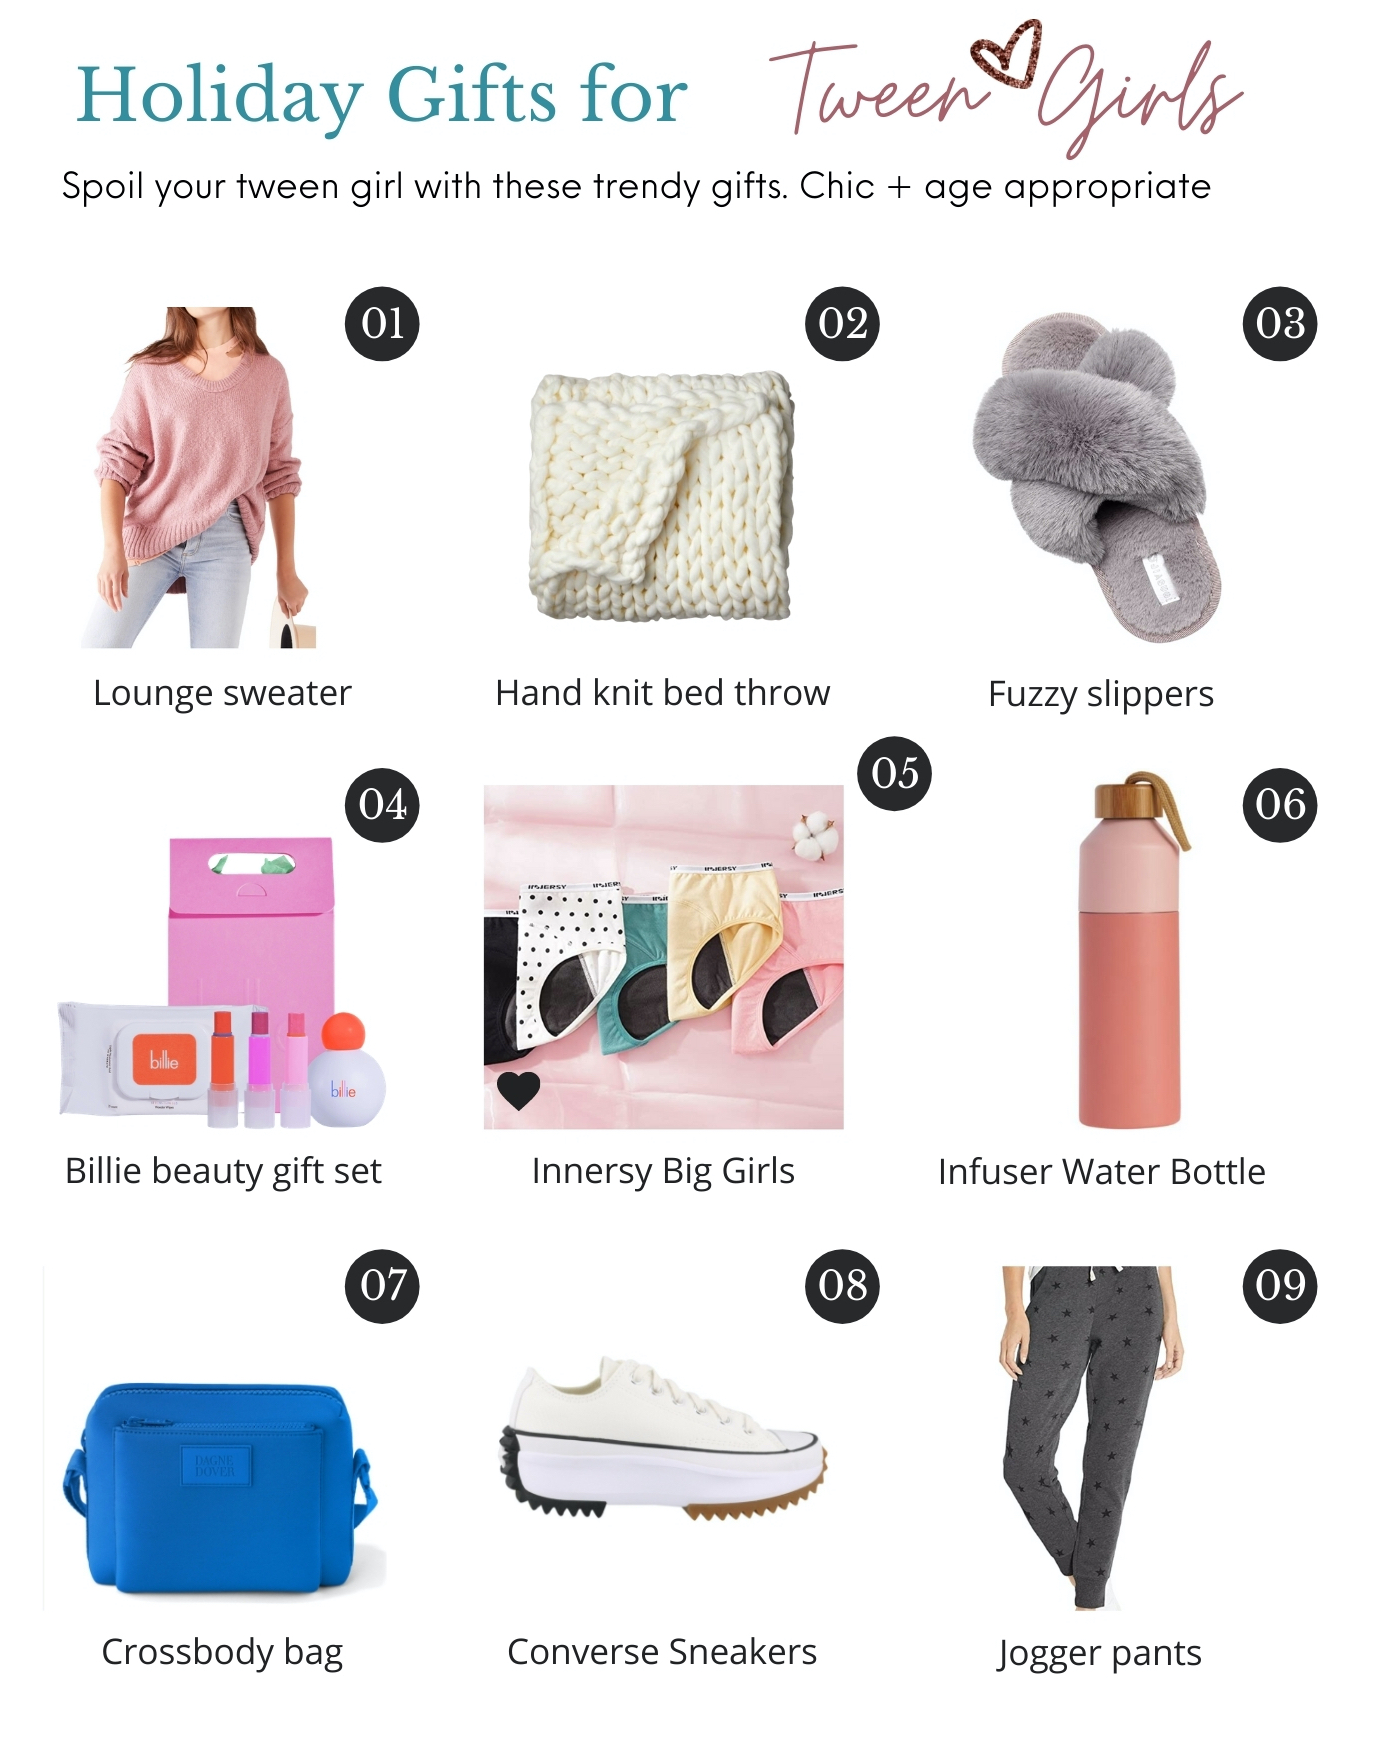 2020 Holiday Gift Guide: Top 9 Best Gift Ideas for Tween Girls